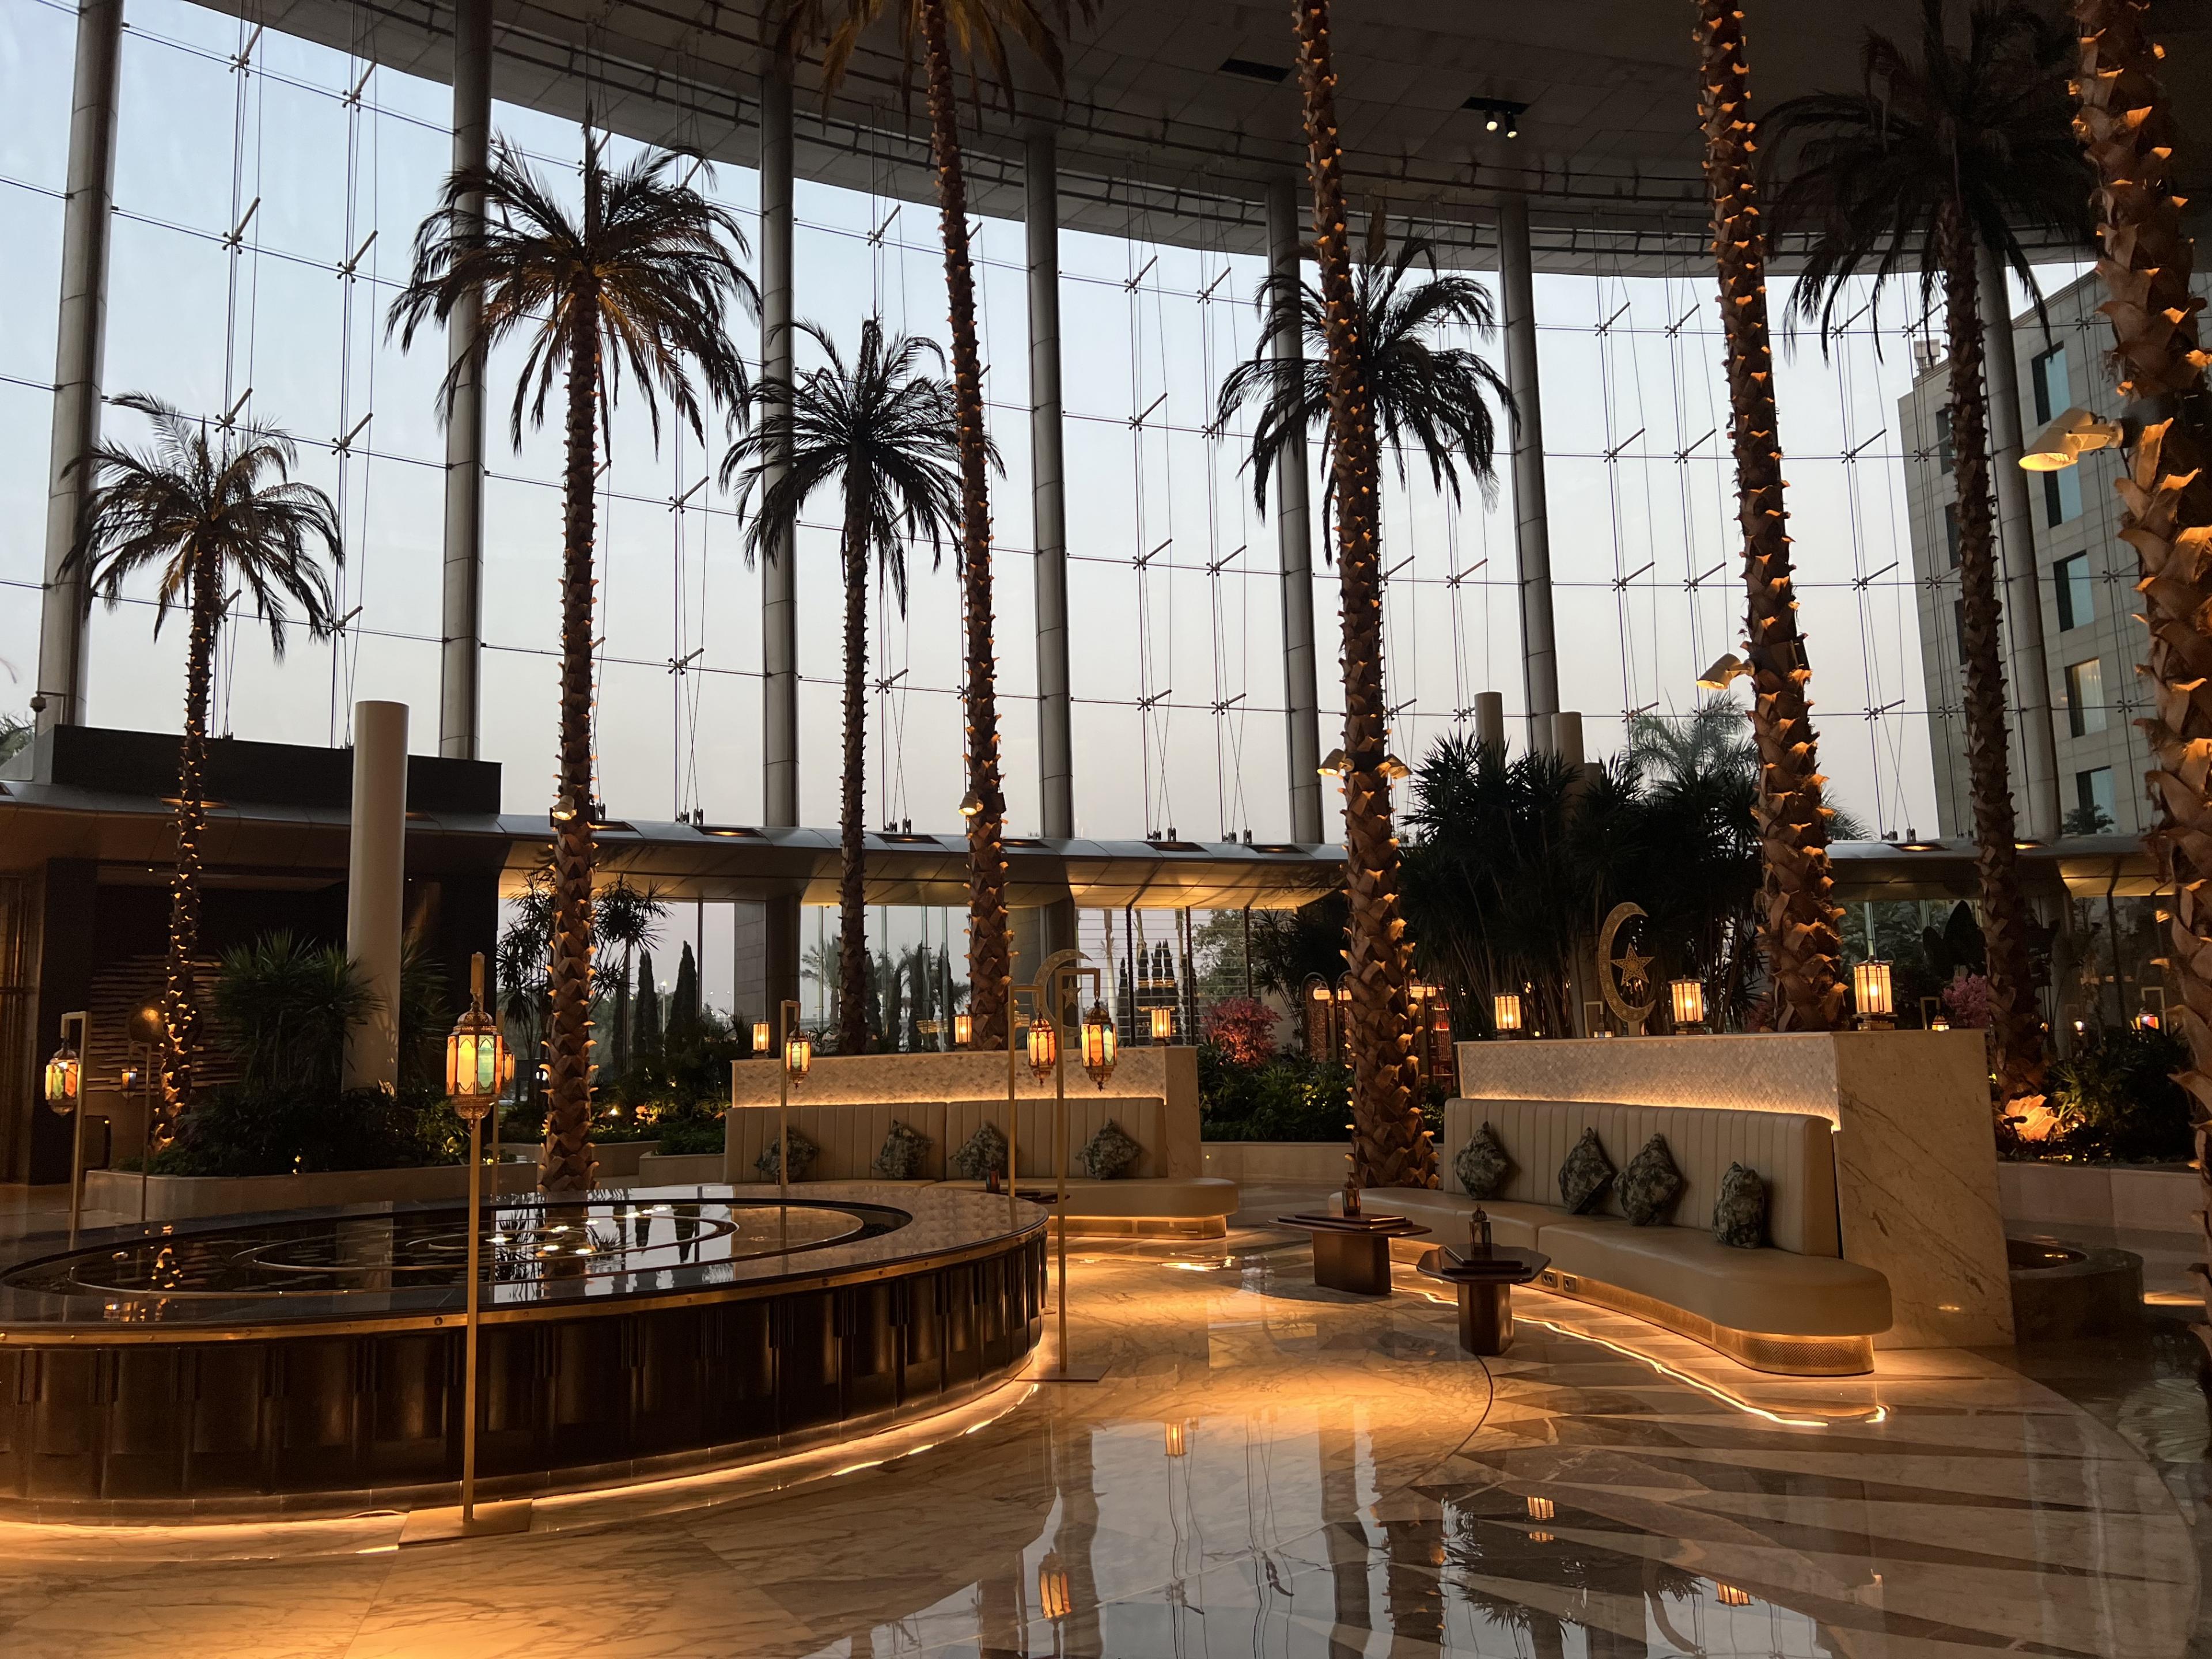 Hotel lobby with palm trees throughout in front of a glass wall with a view of outside 